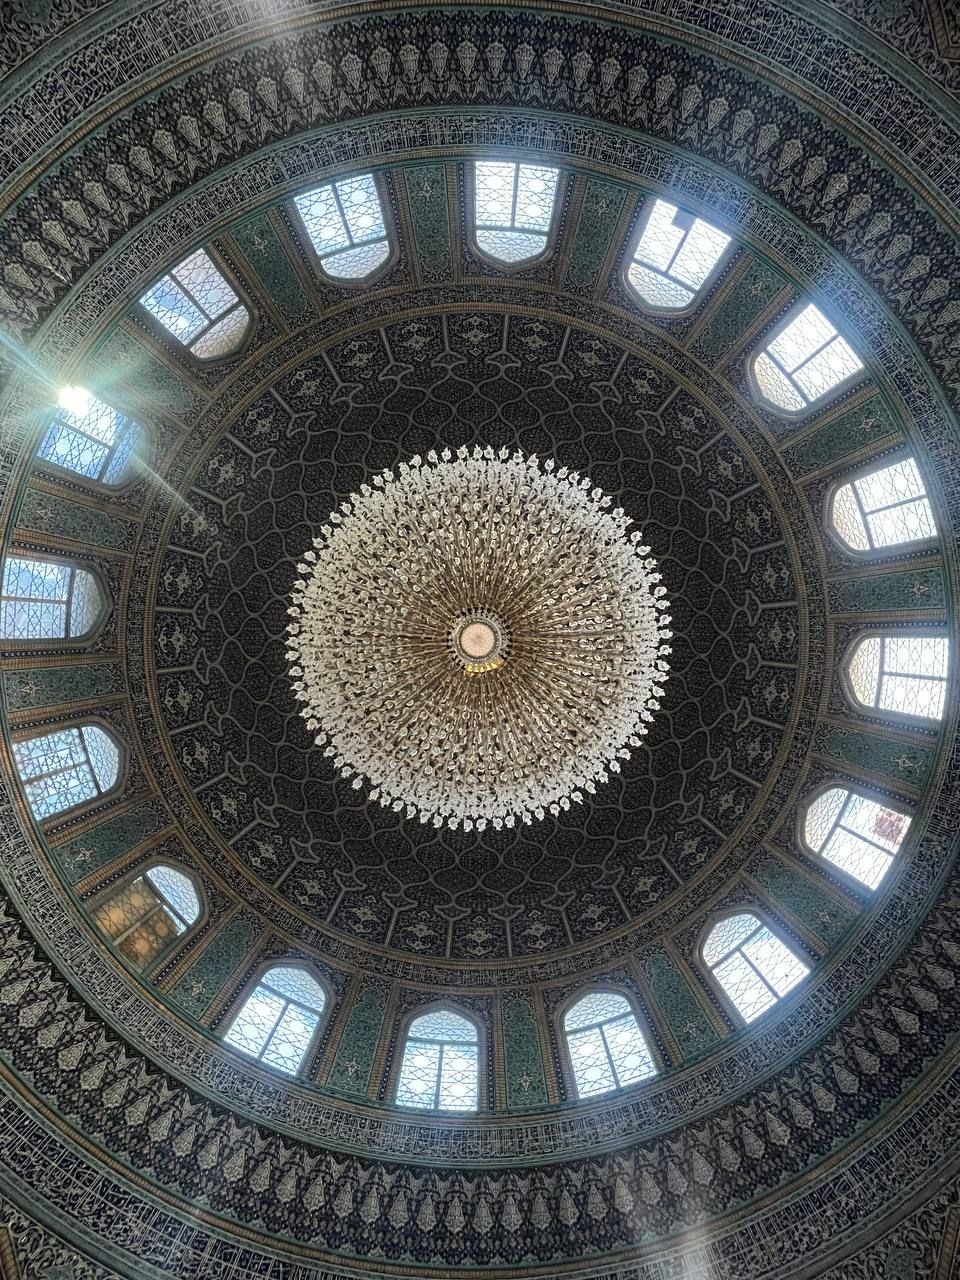 a dome ceiling with many windows